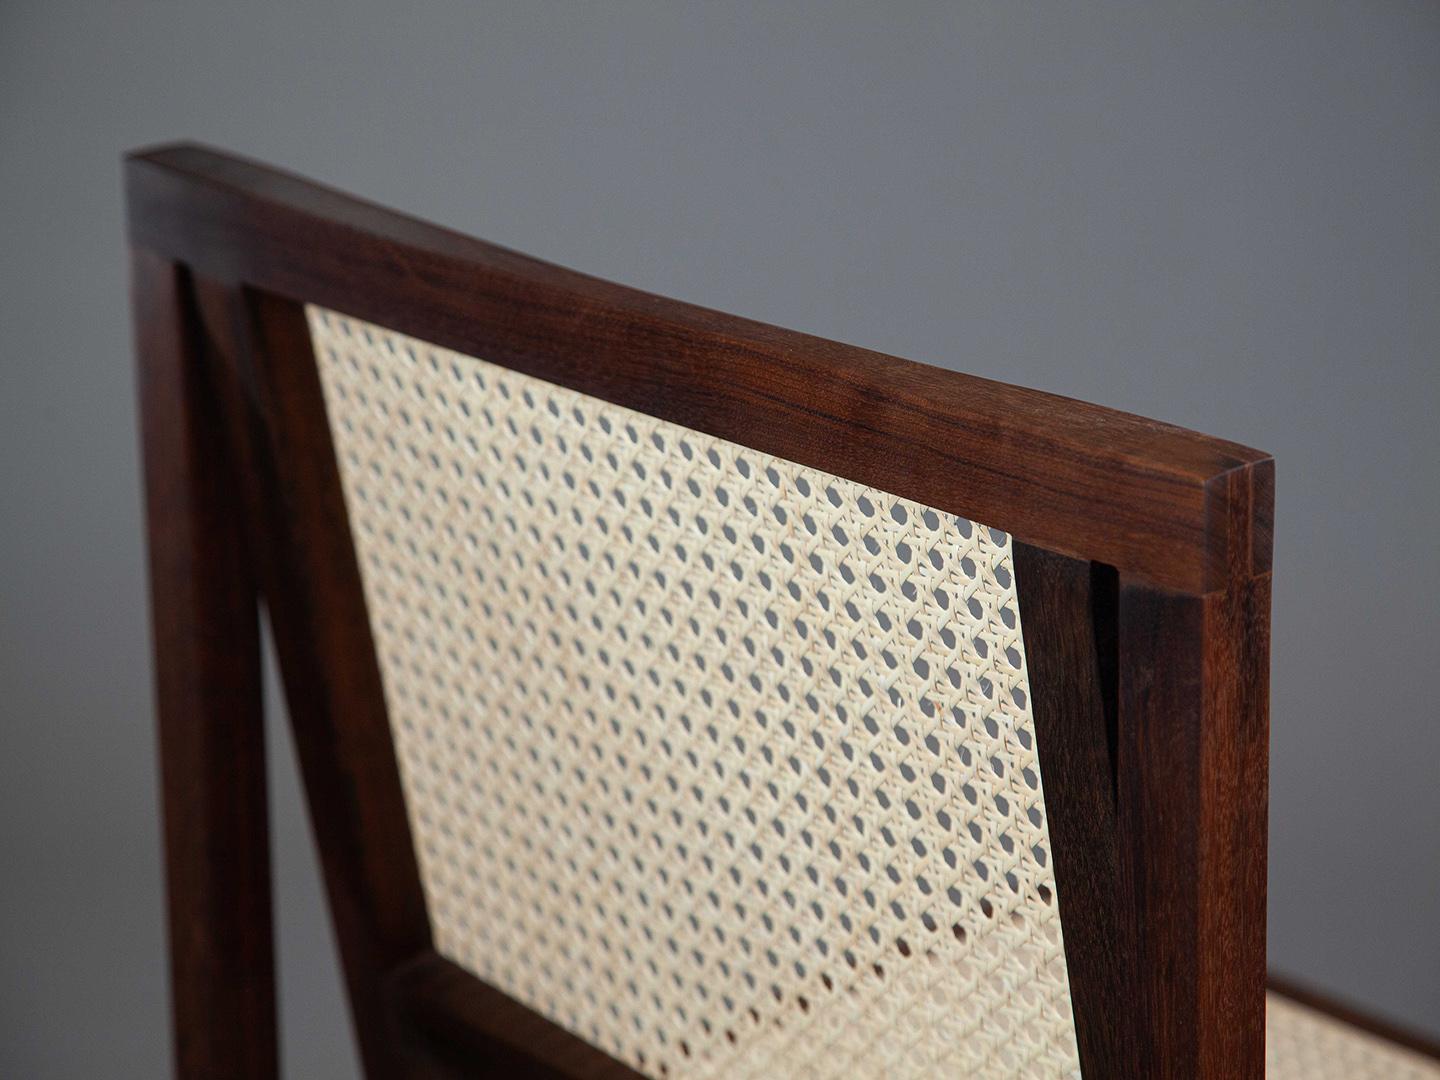 Brazilian The Square Chair. Produced with Solid Wood Using Mortise and Tenon Joinery.  For Sale